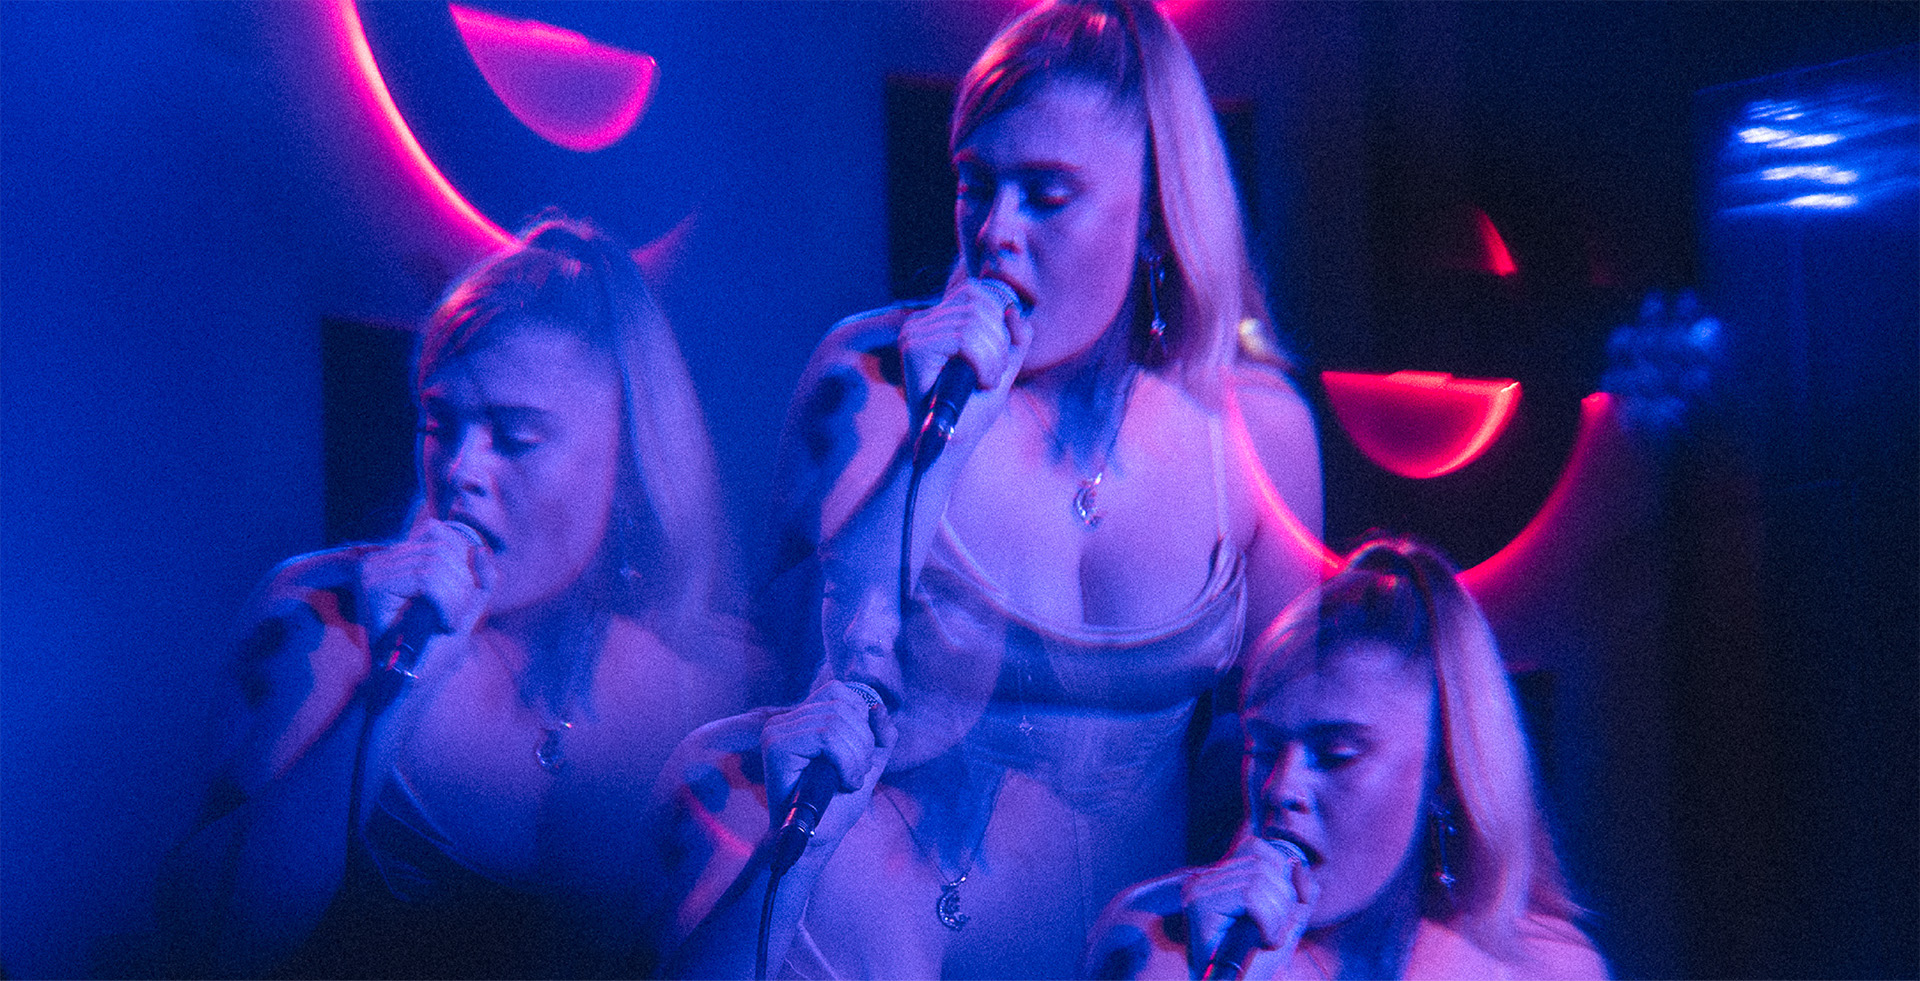 An edited, layered image of a person singing